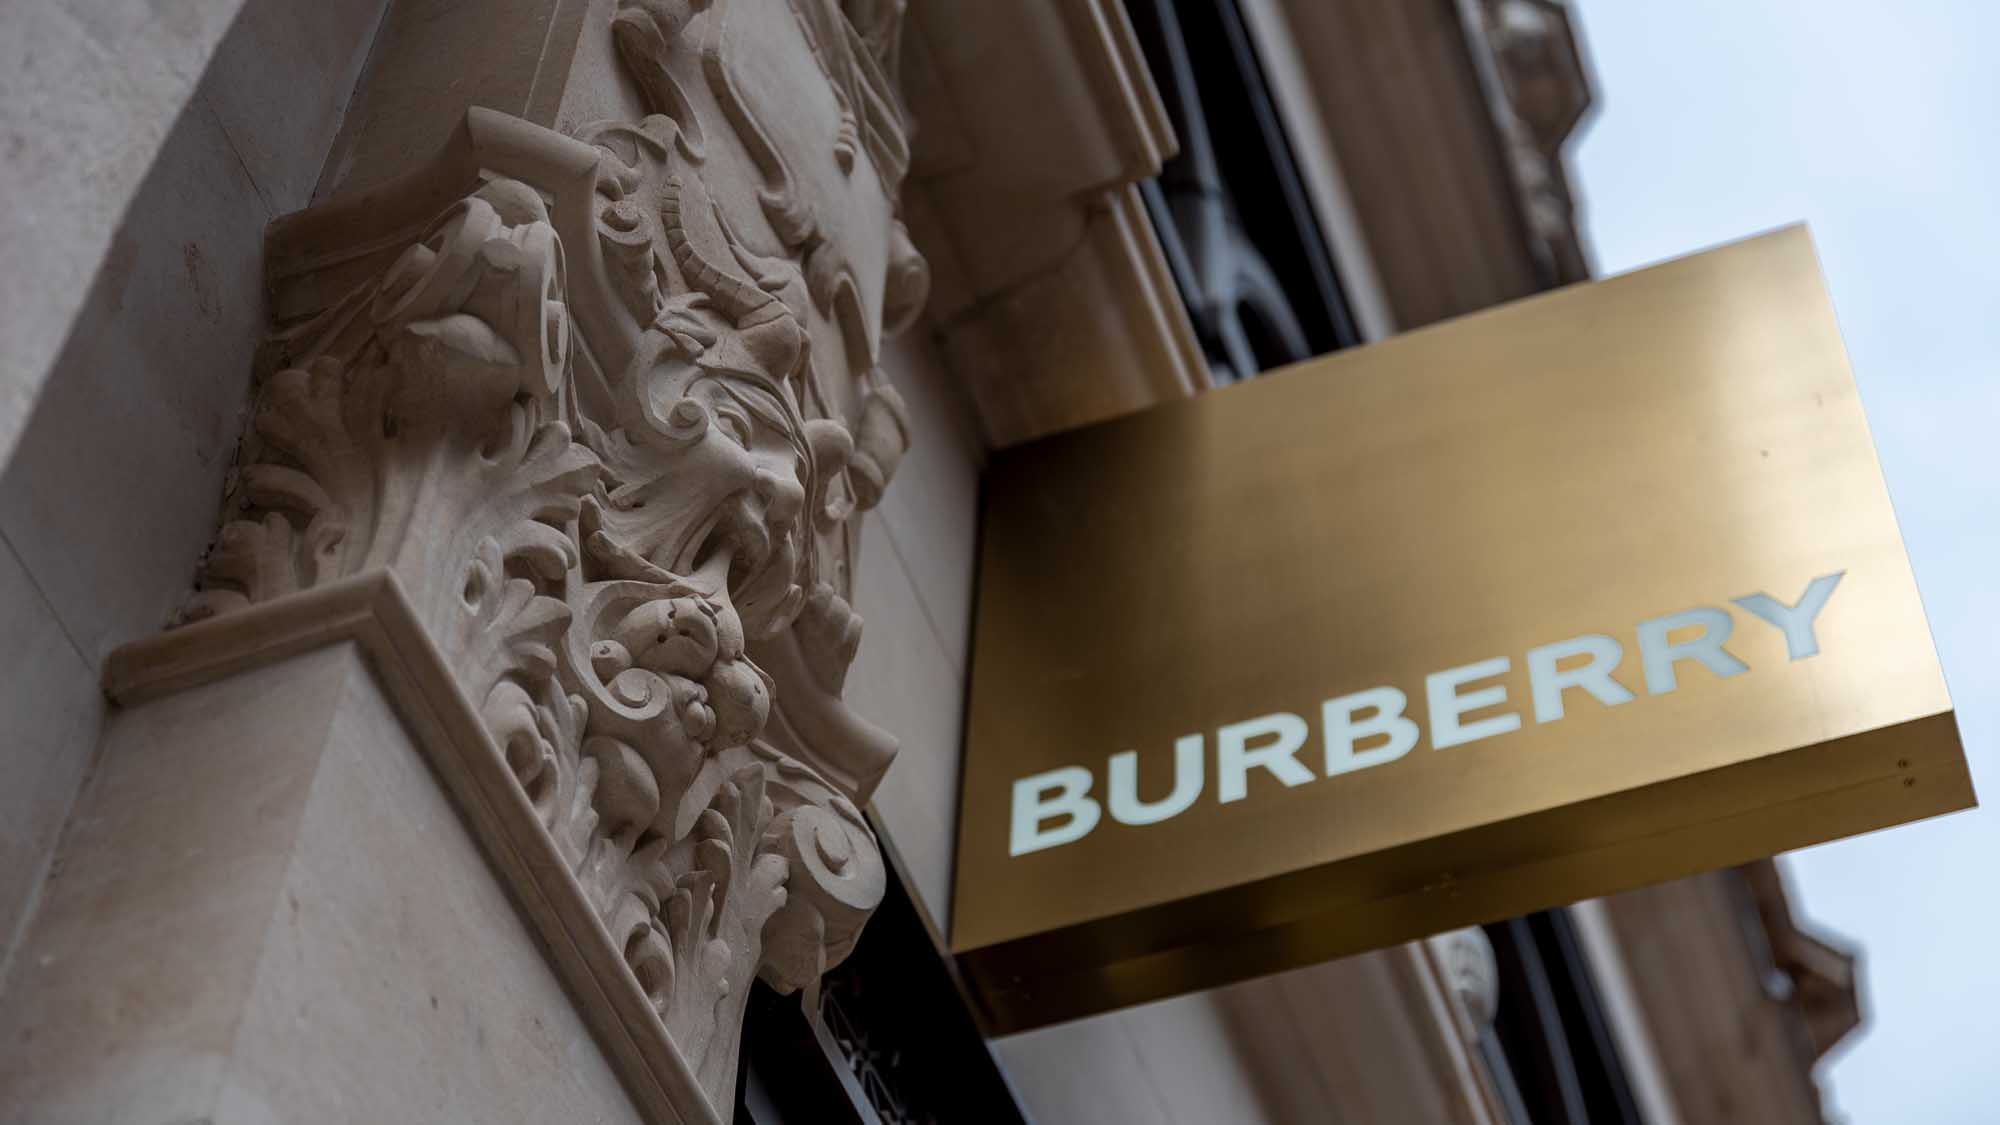 New Burberry store opens